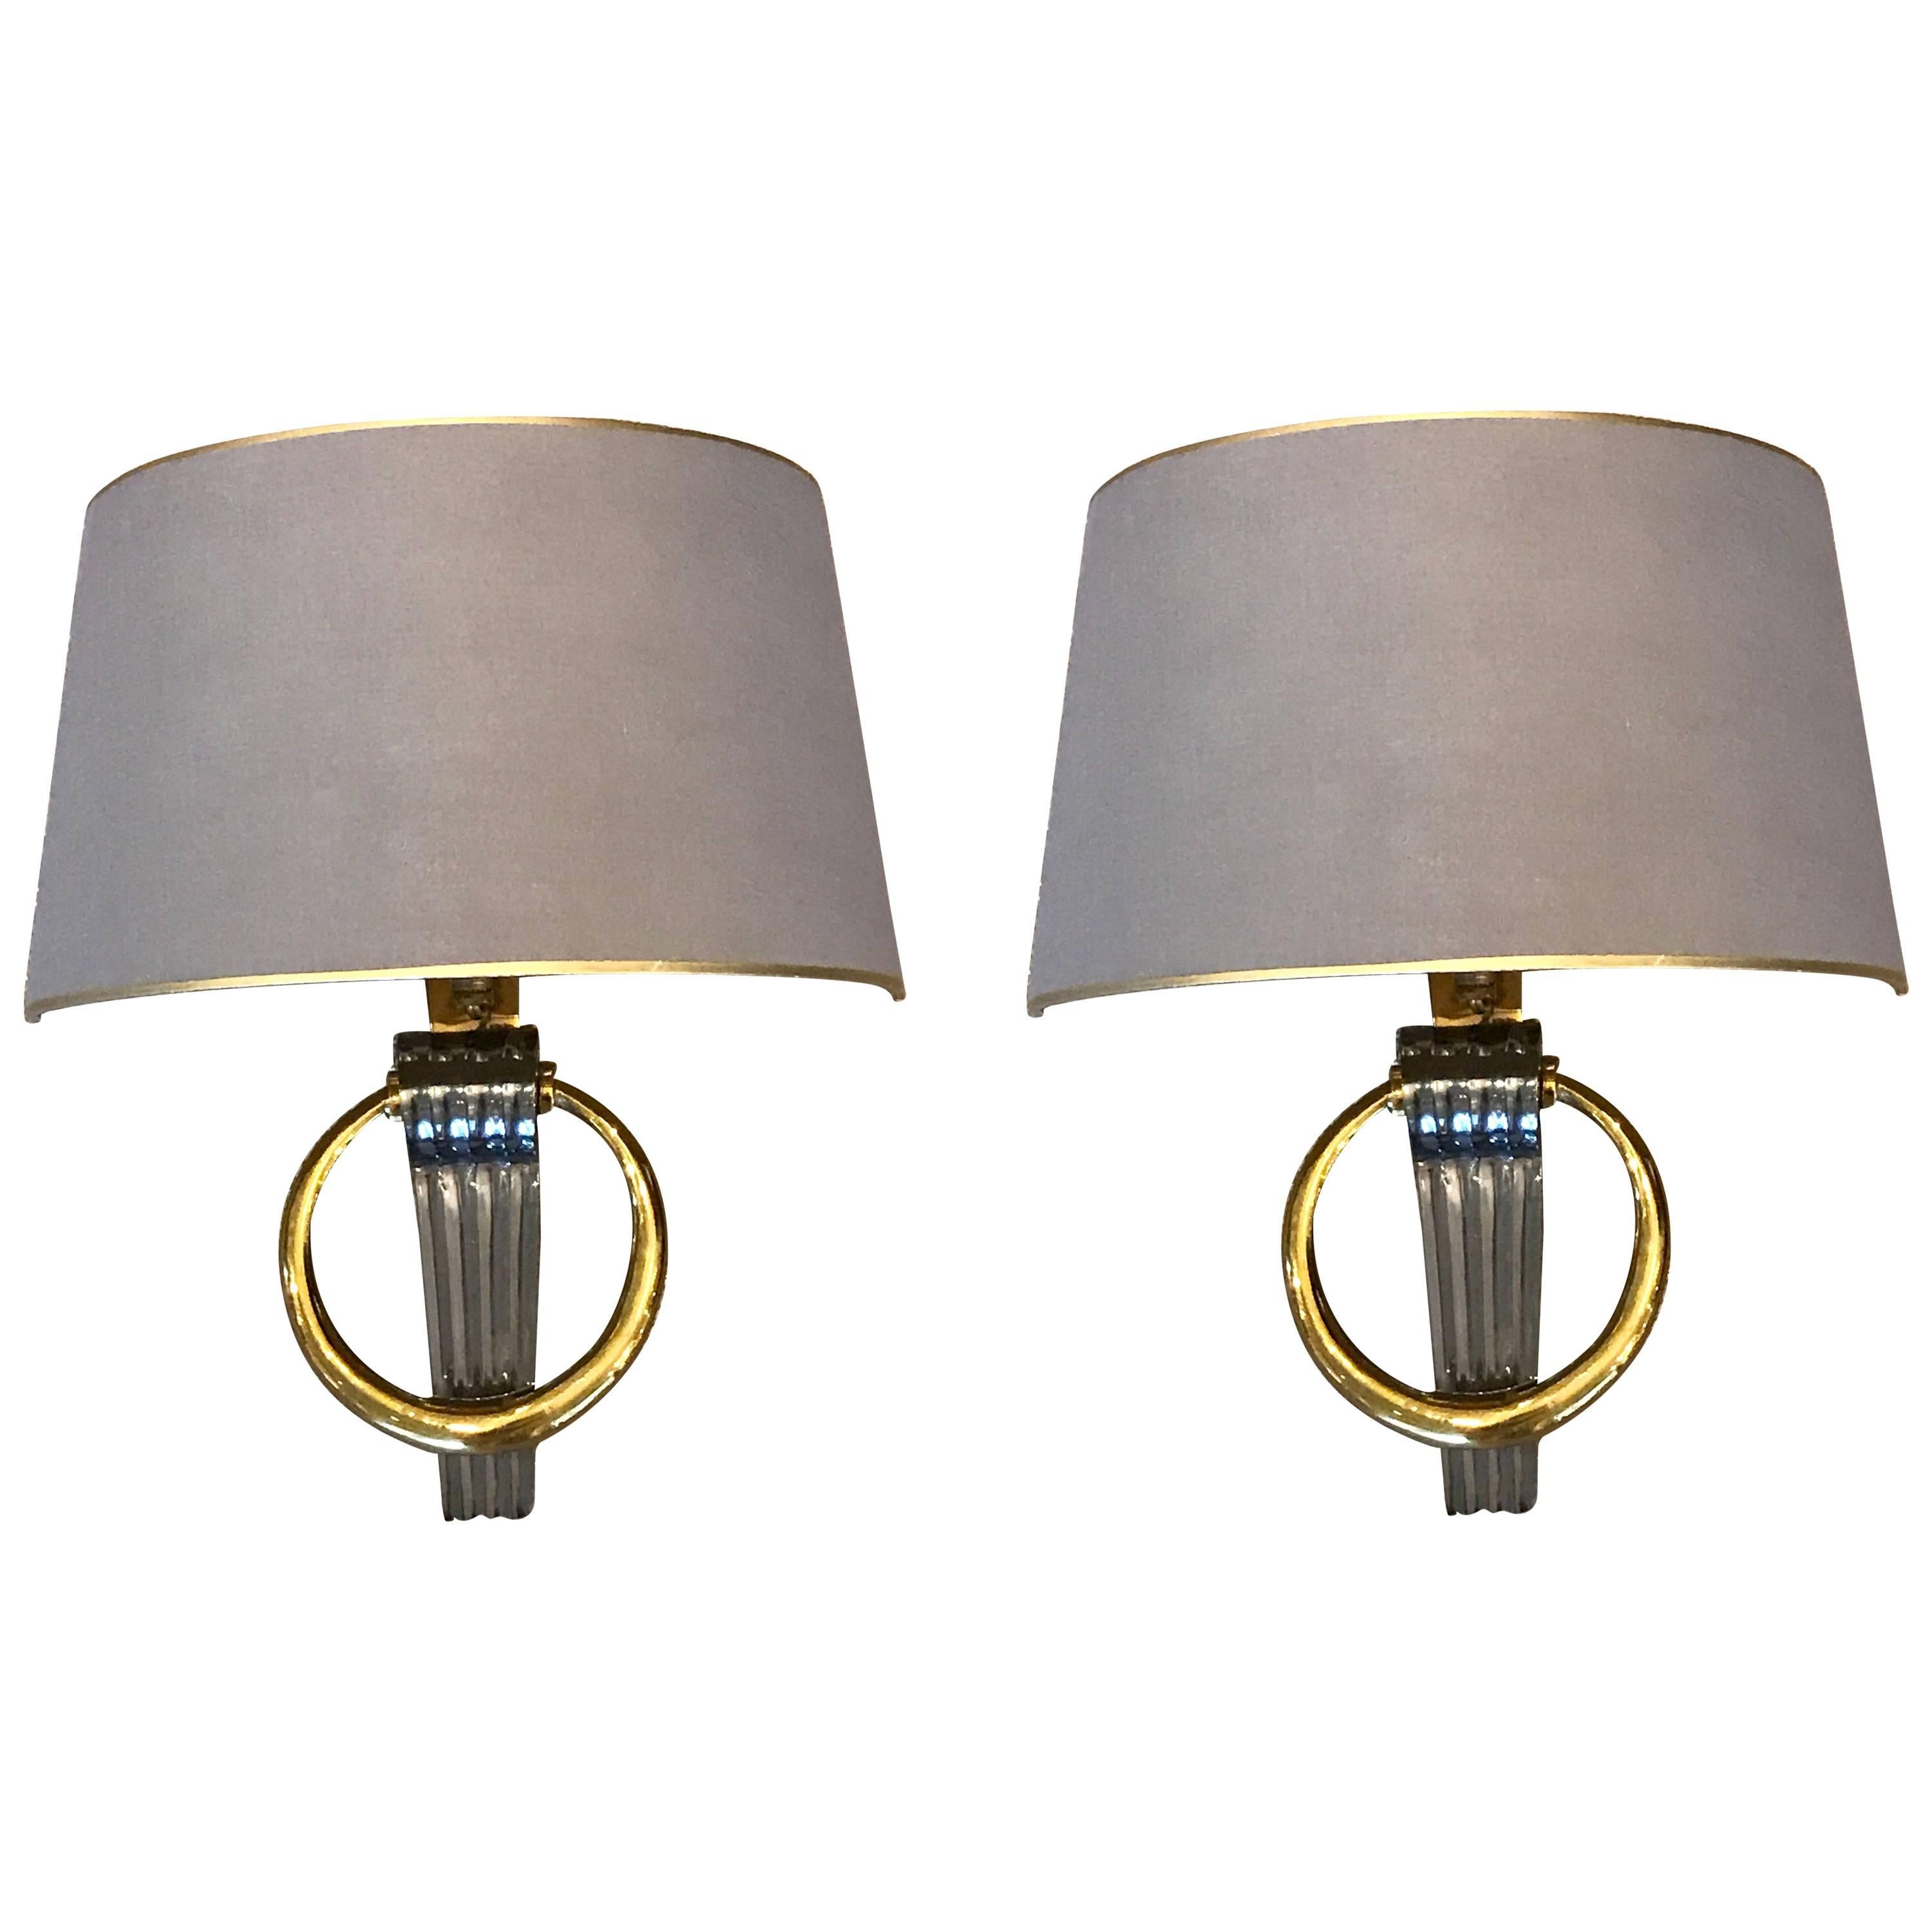 Exquisite Pair of Maison Jansen Neoclassical Wall Lights For Sale